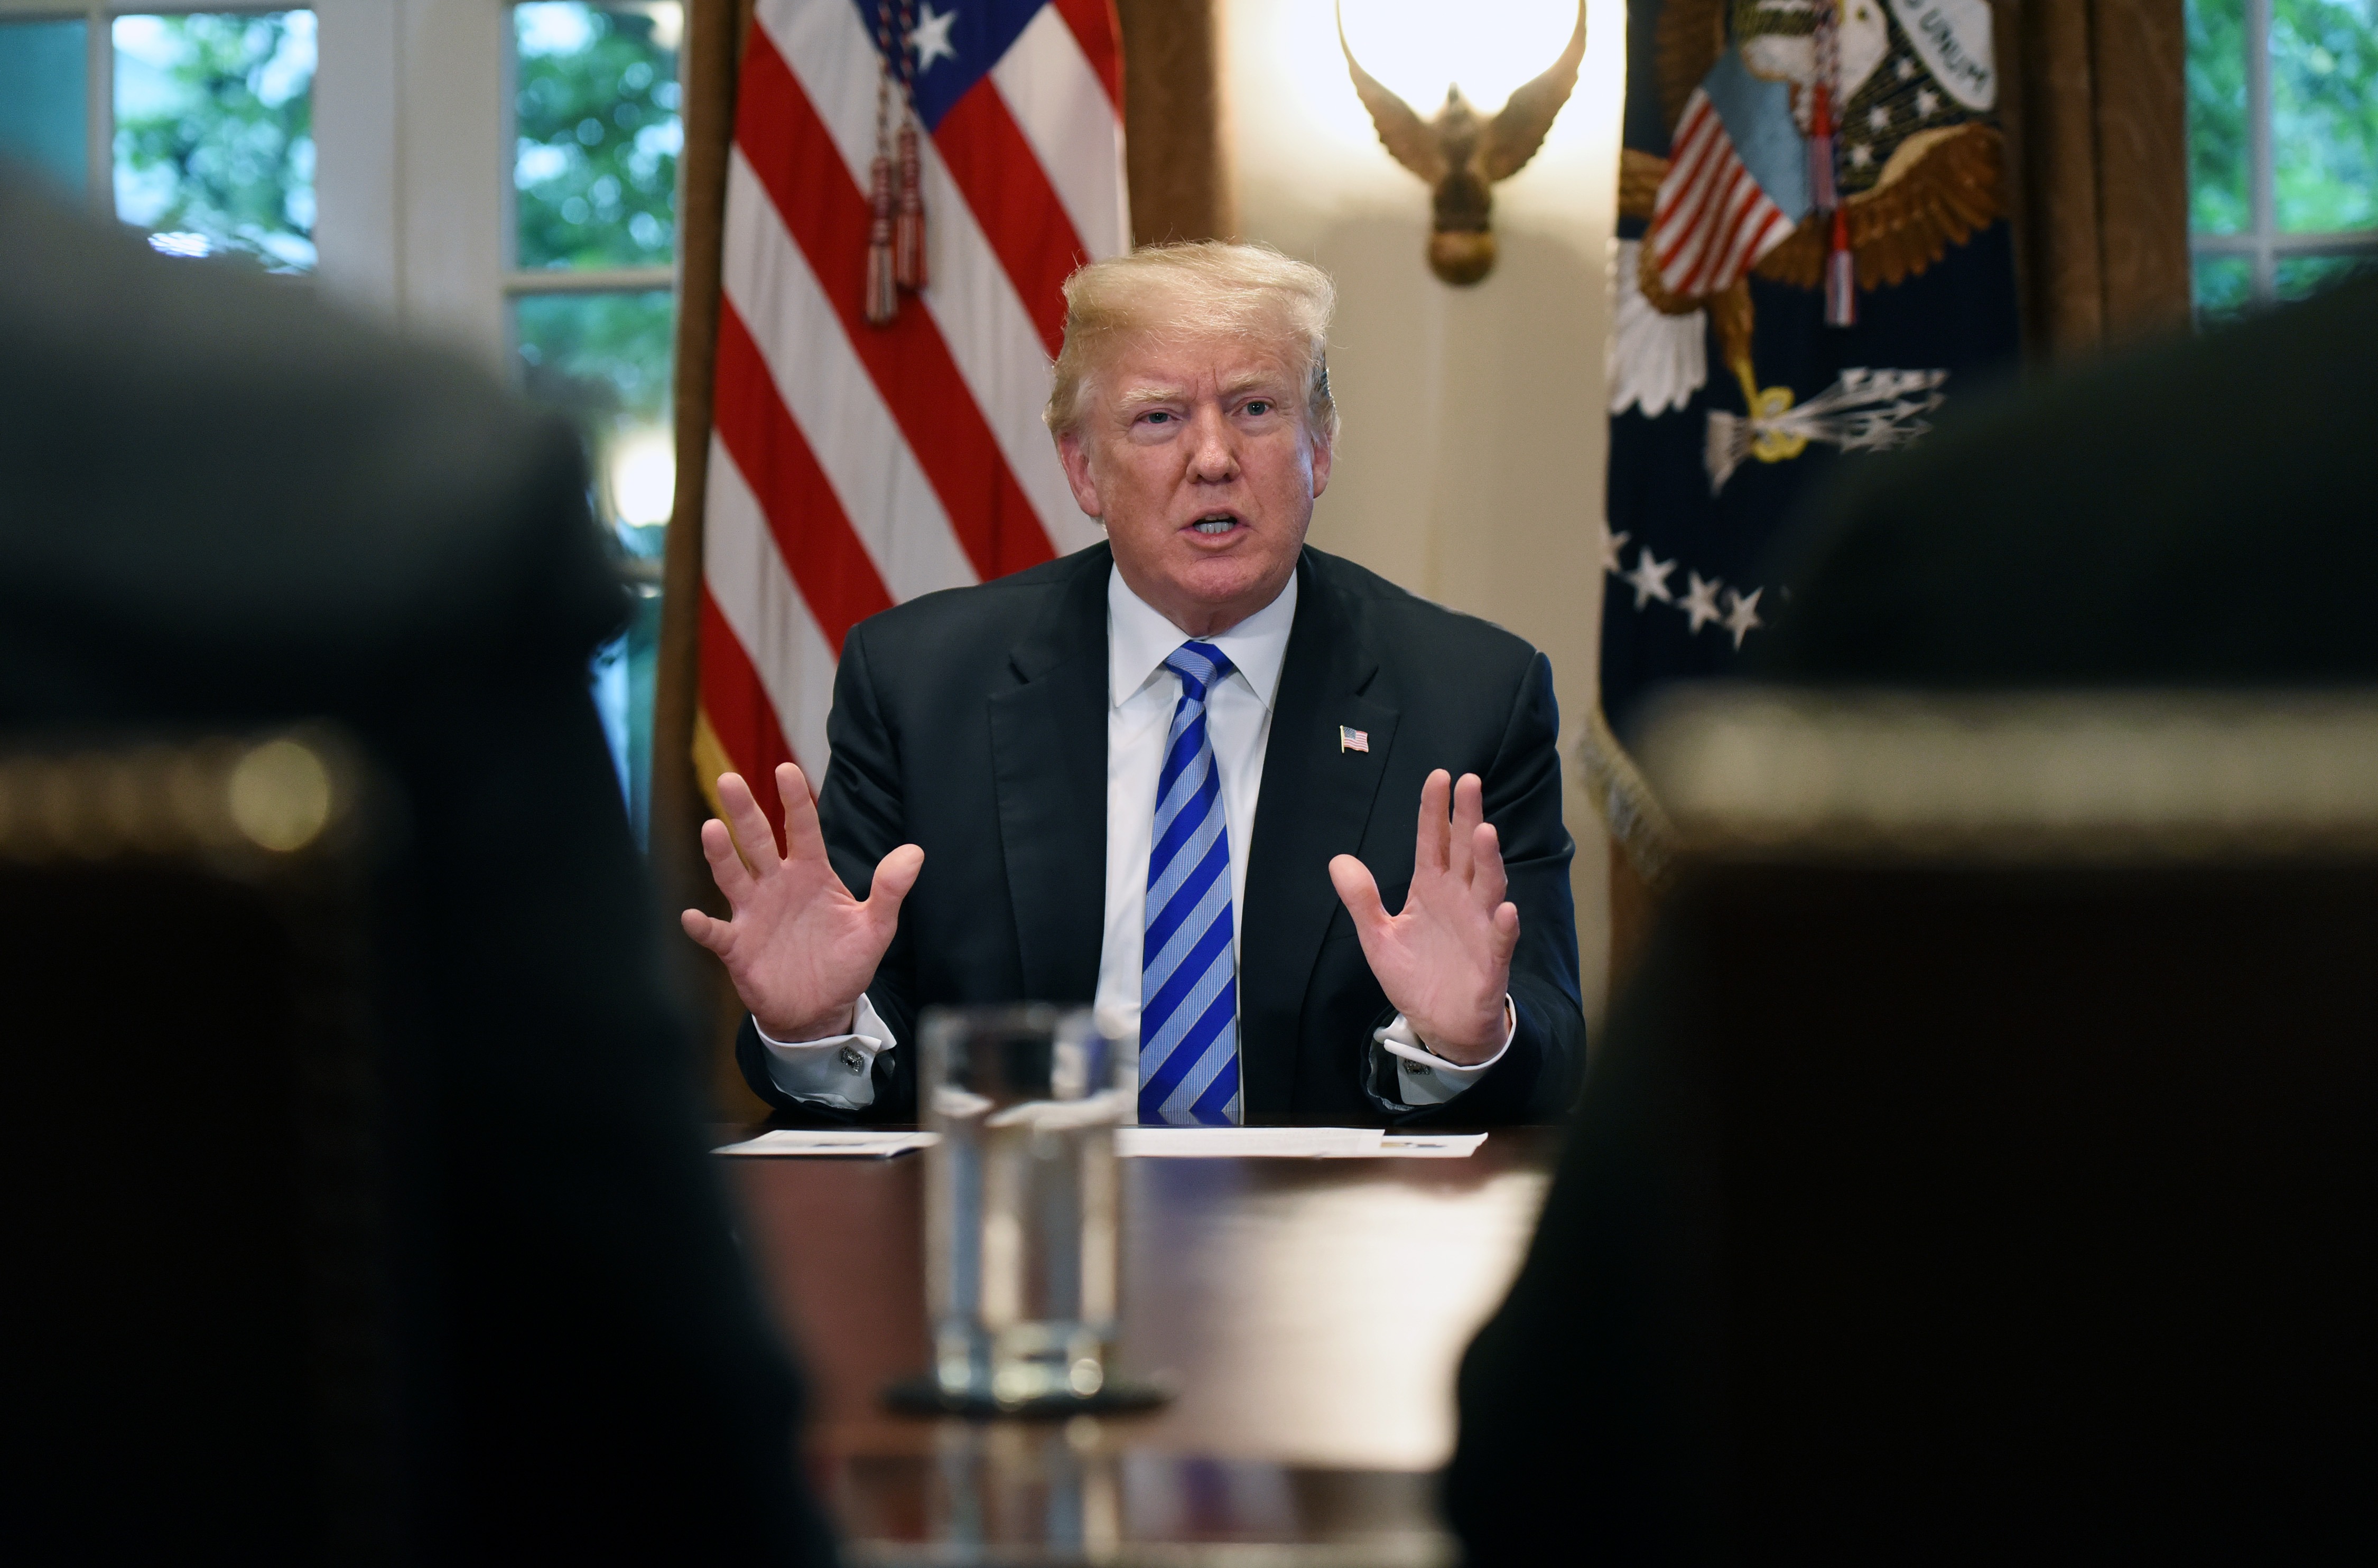 U.S. President Donald Trump speaks during a meeting with California leaders and public officials who oppose California's sanctuary policies in the Cabinet Room of the White House May 16, 2018 in Washington, D.C. (Pool&mdash;Getty Images)